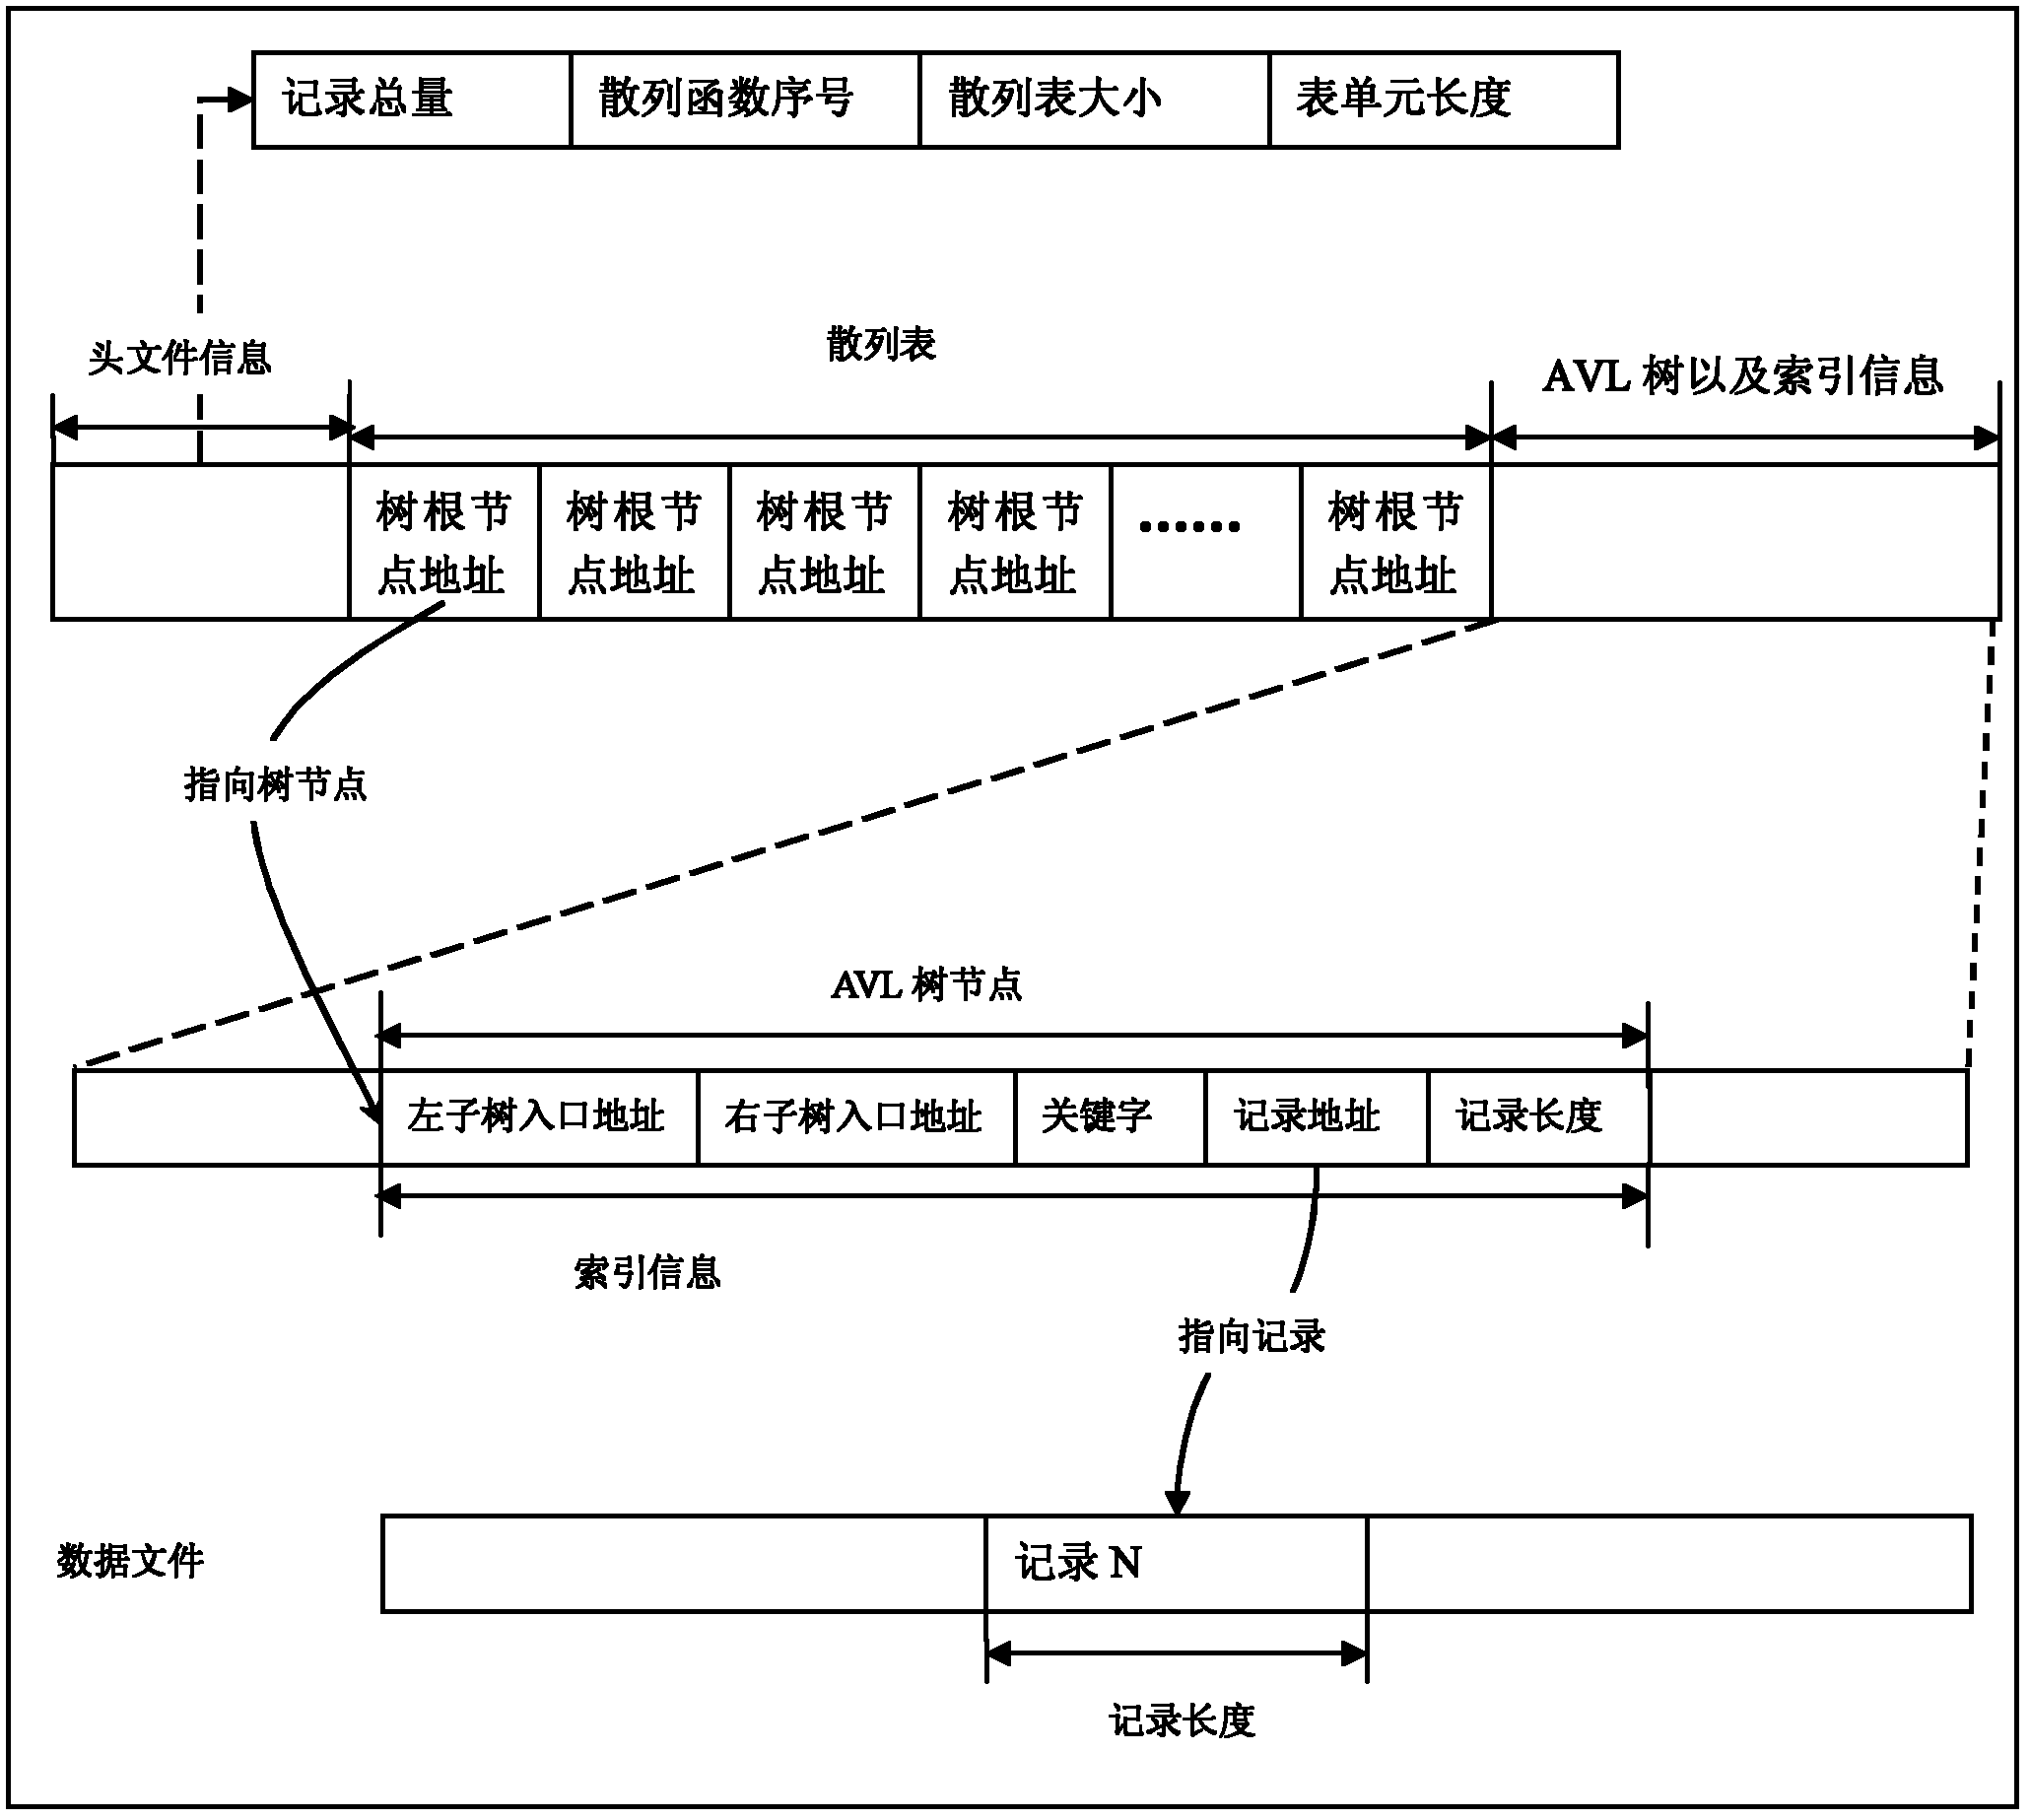 Searching and storing method for embedded database